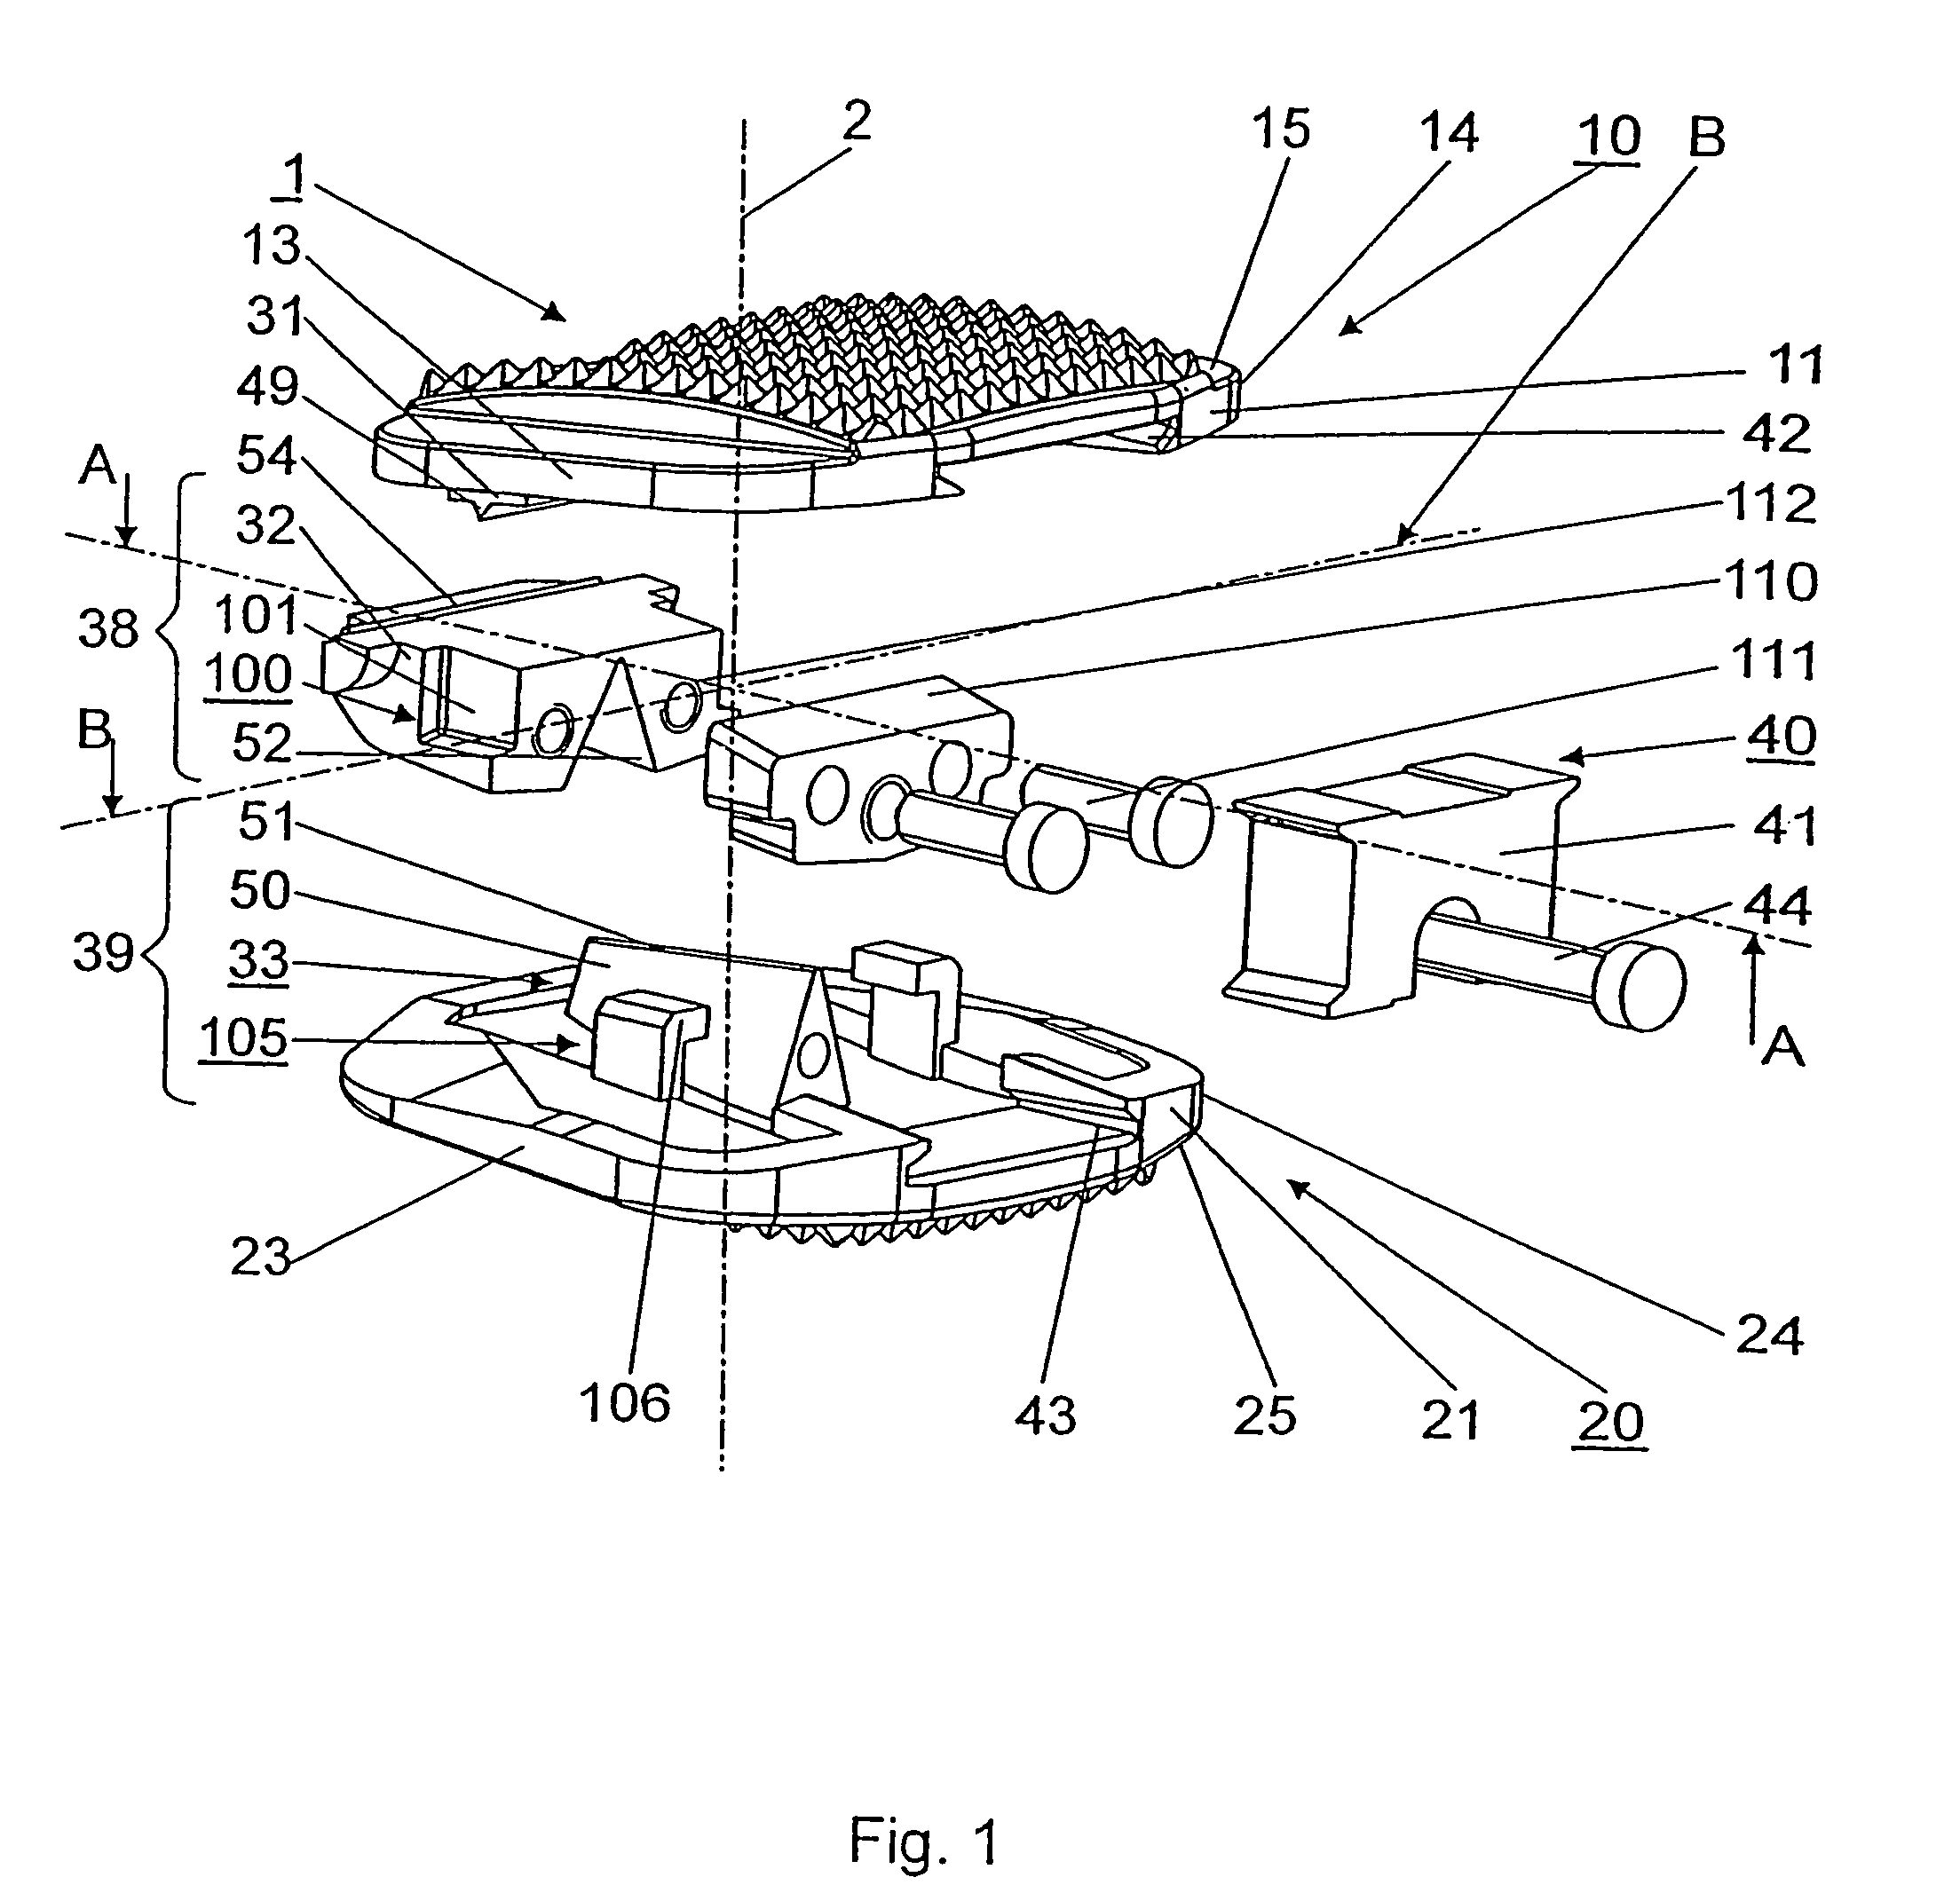 Intervertebral implant with tiltable joint parts